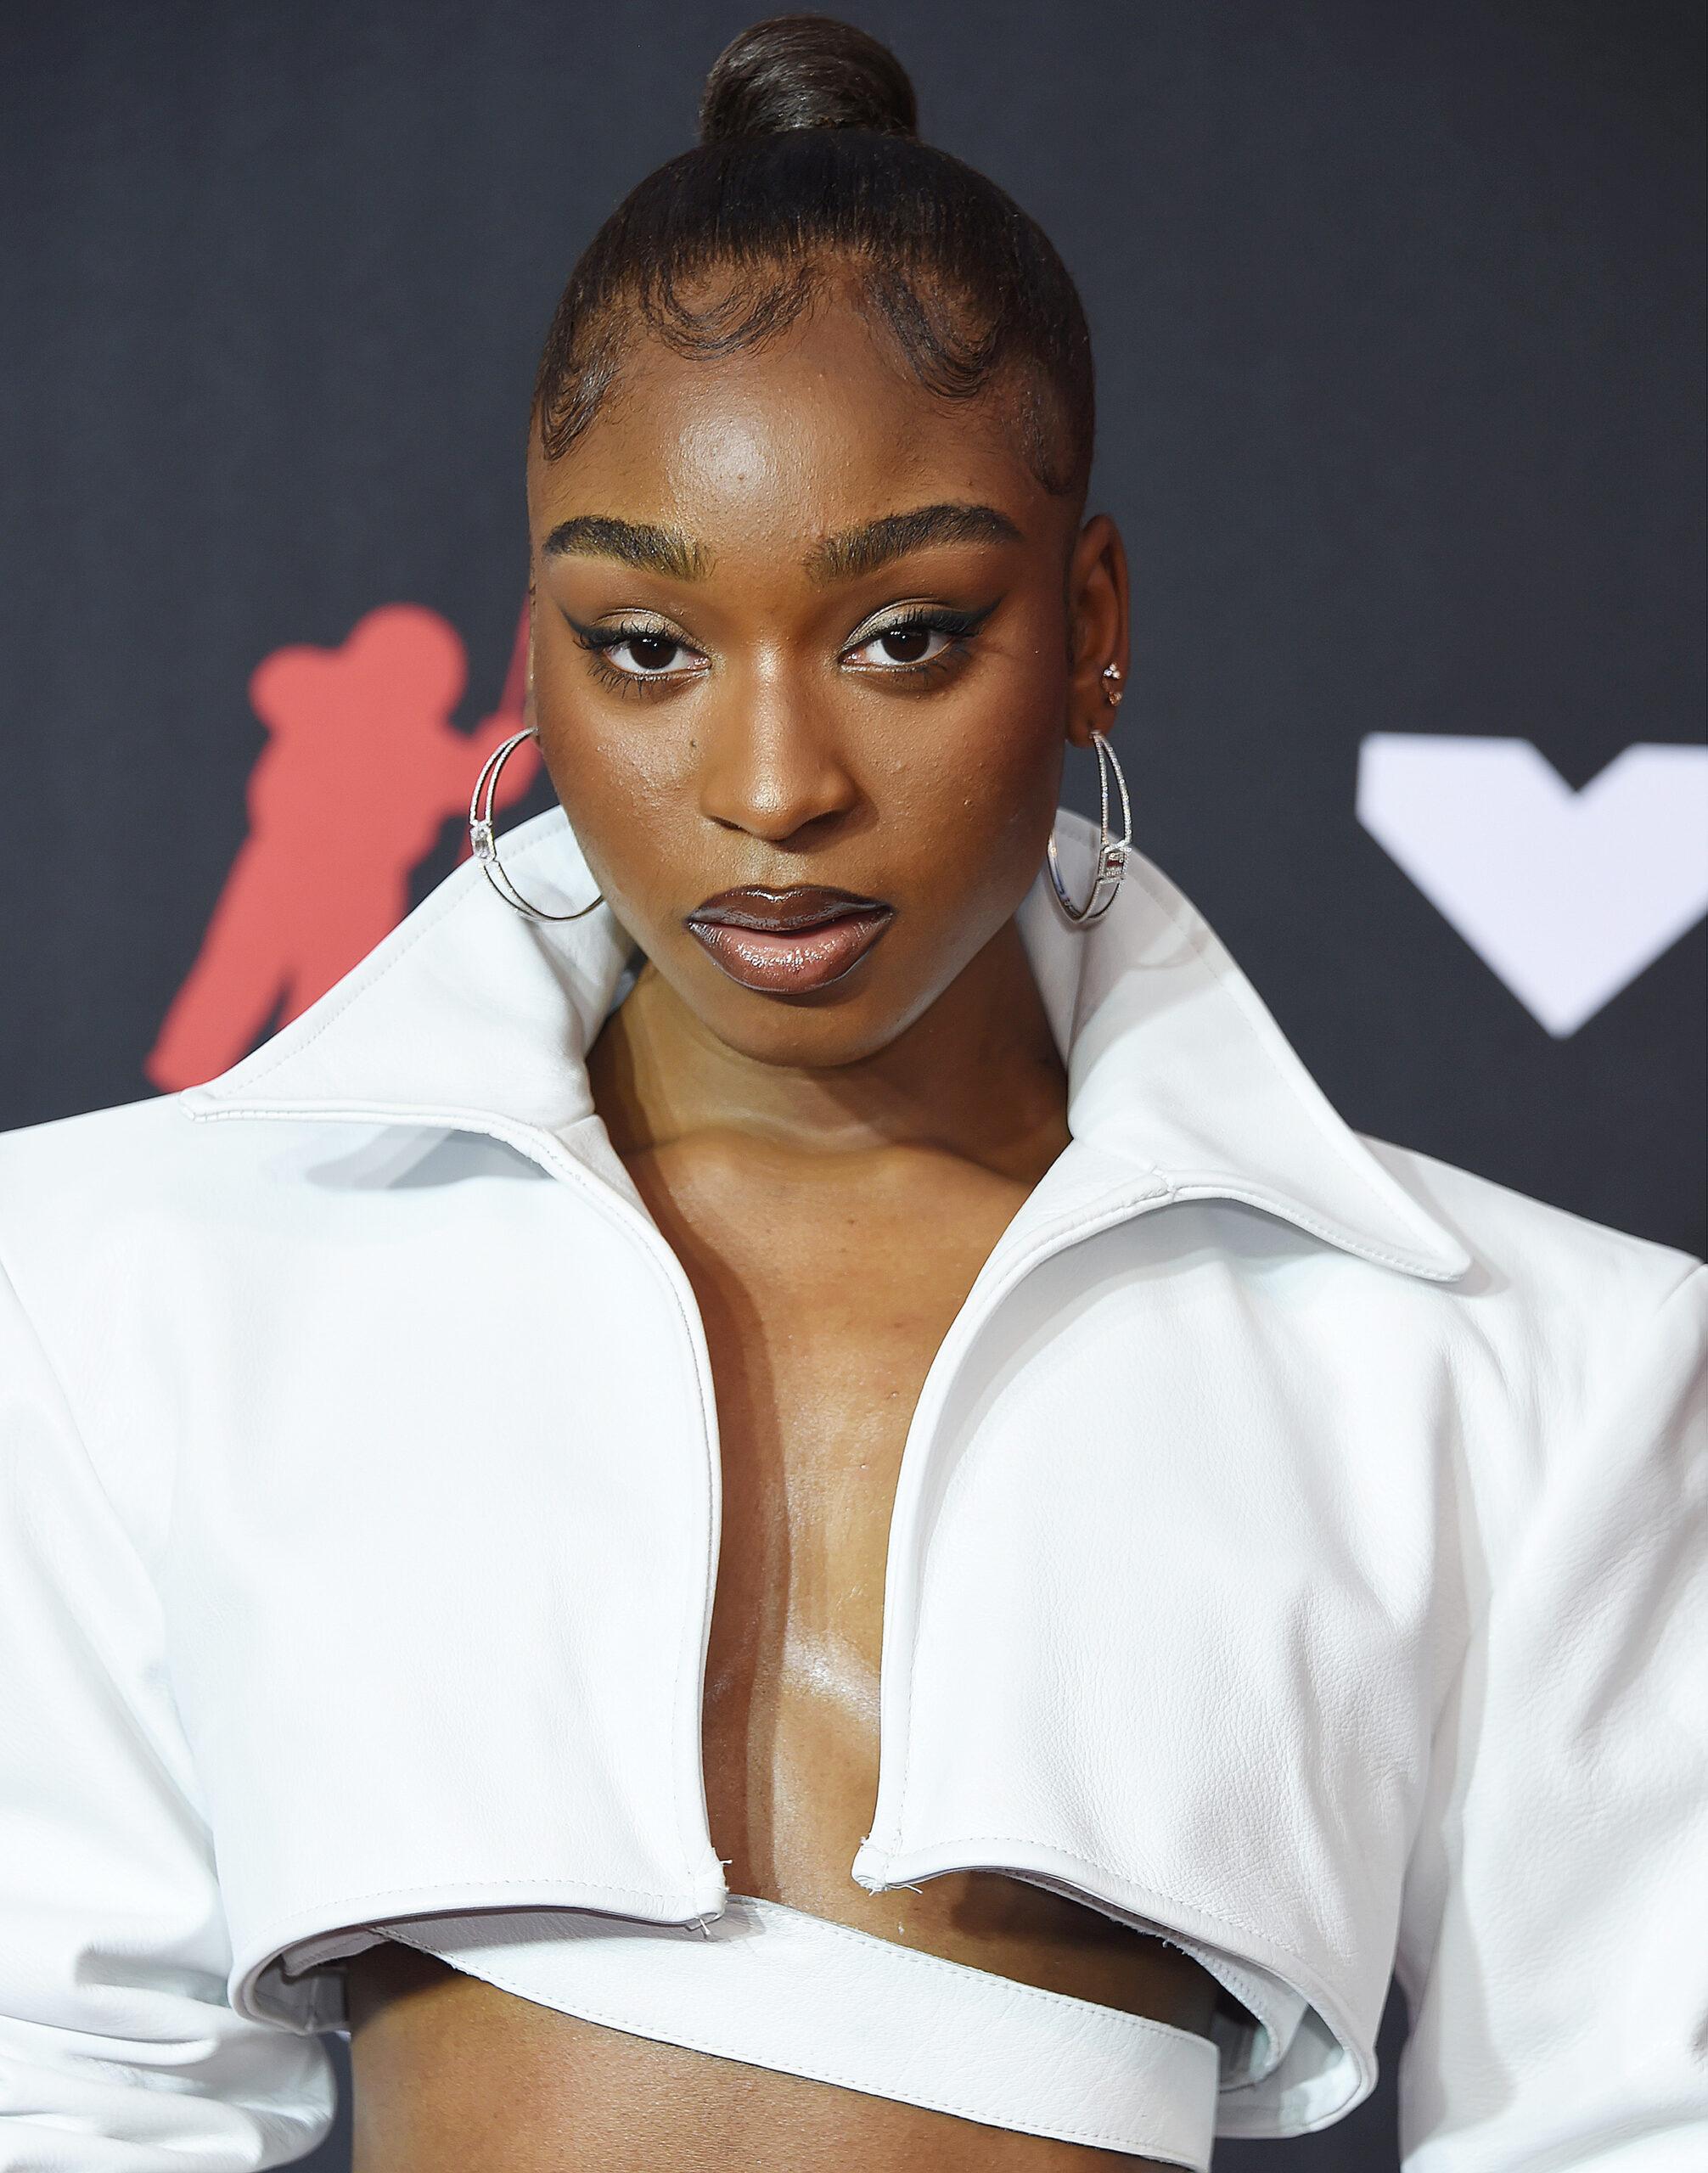 Normani at the 2021 MTV VMAs at the Barclays Center Brooklyn in New York City